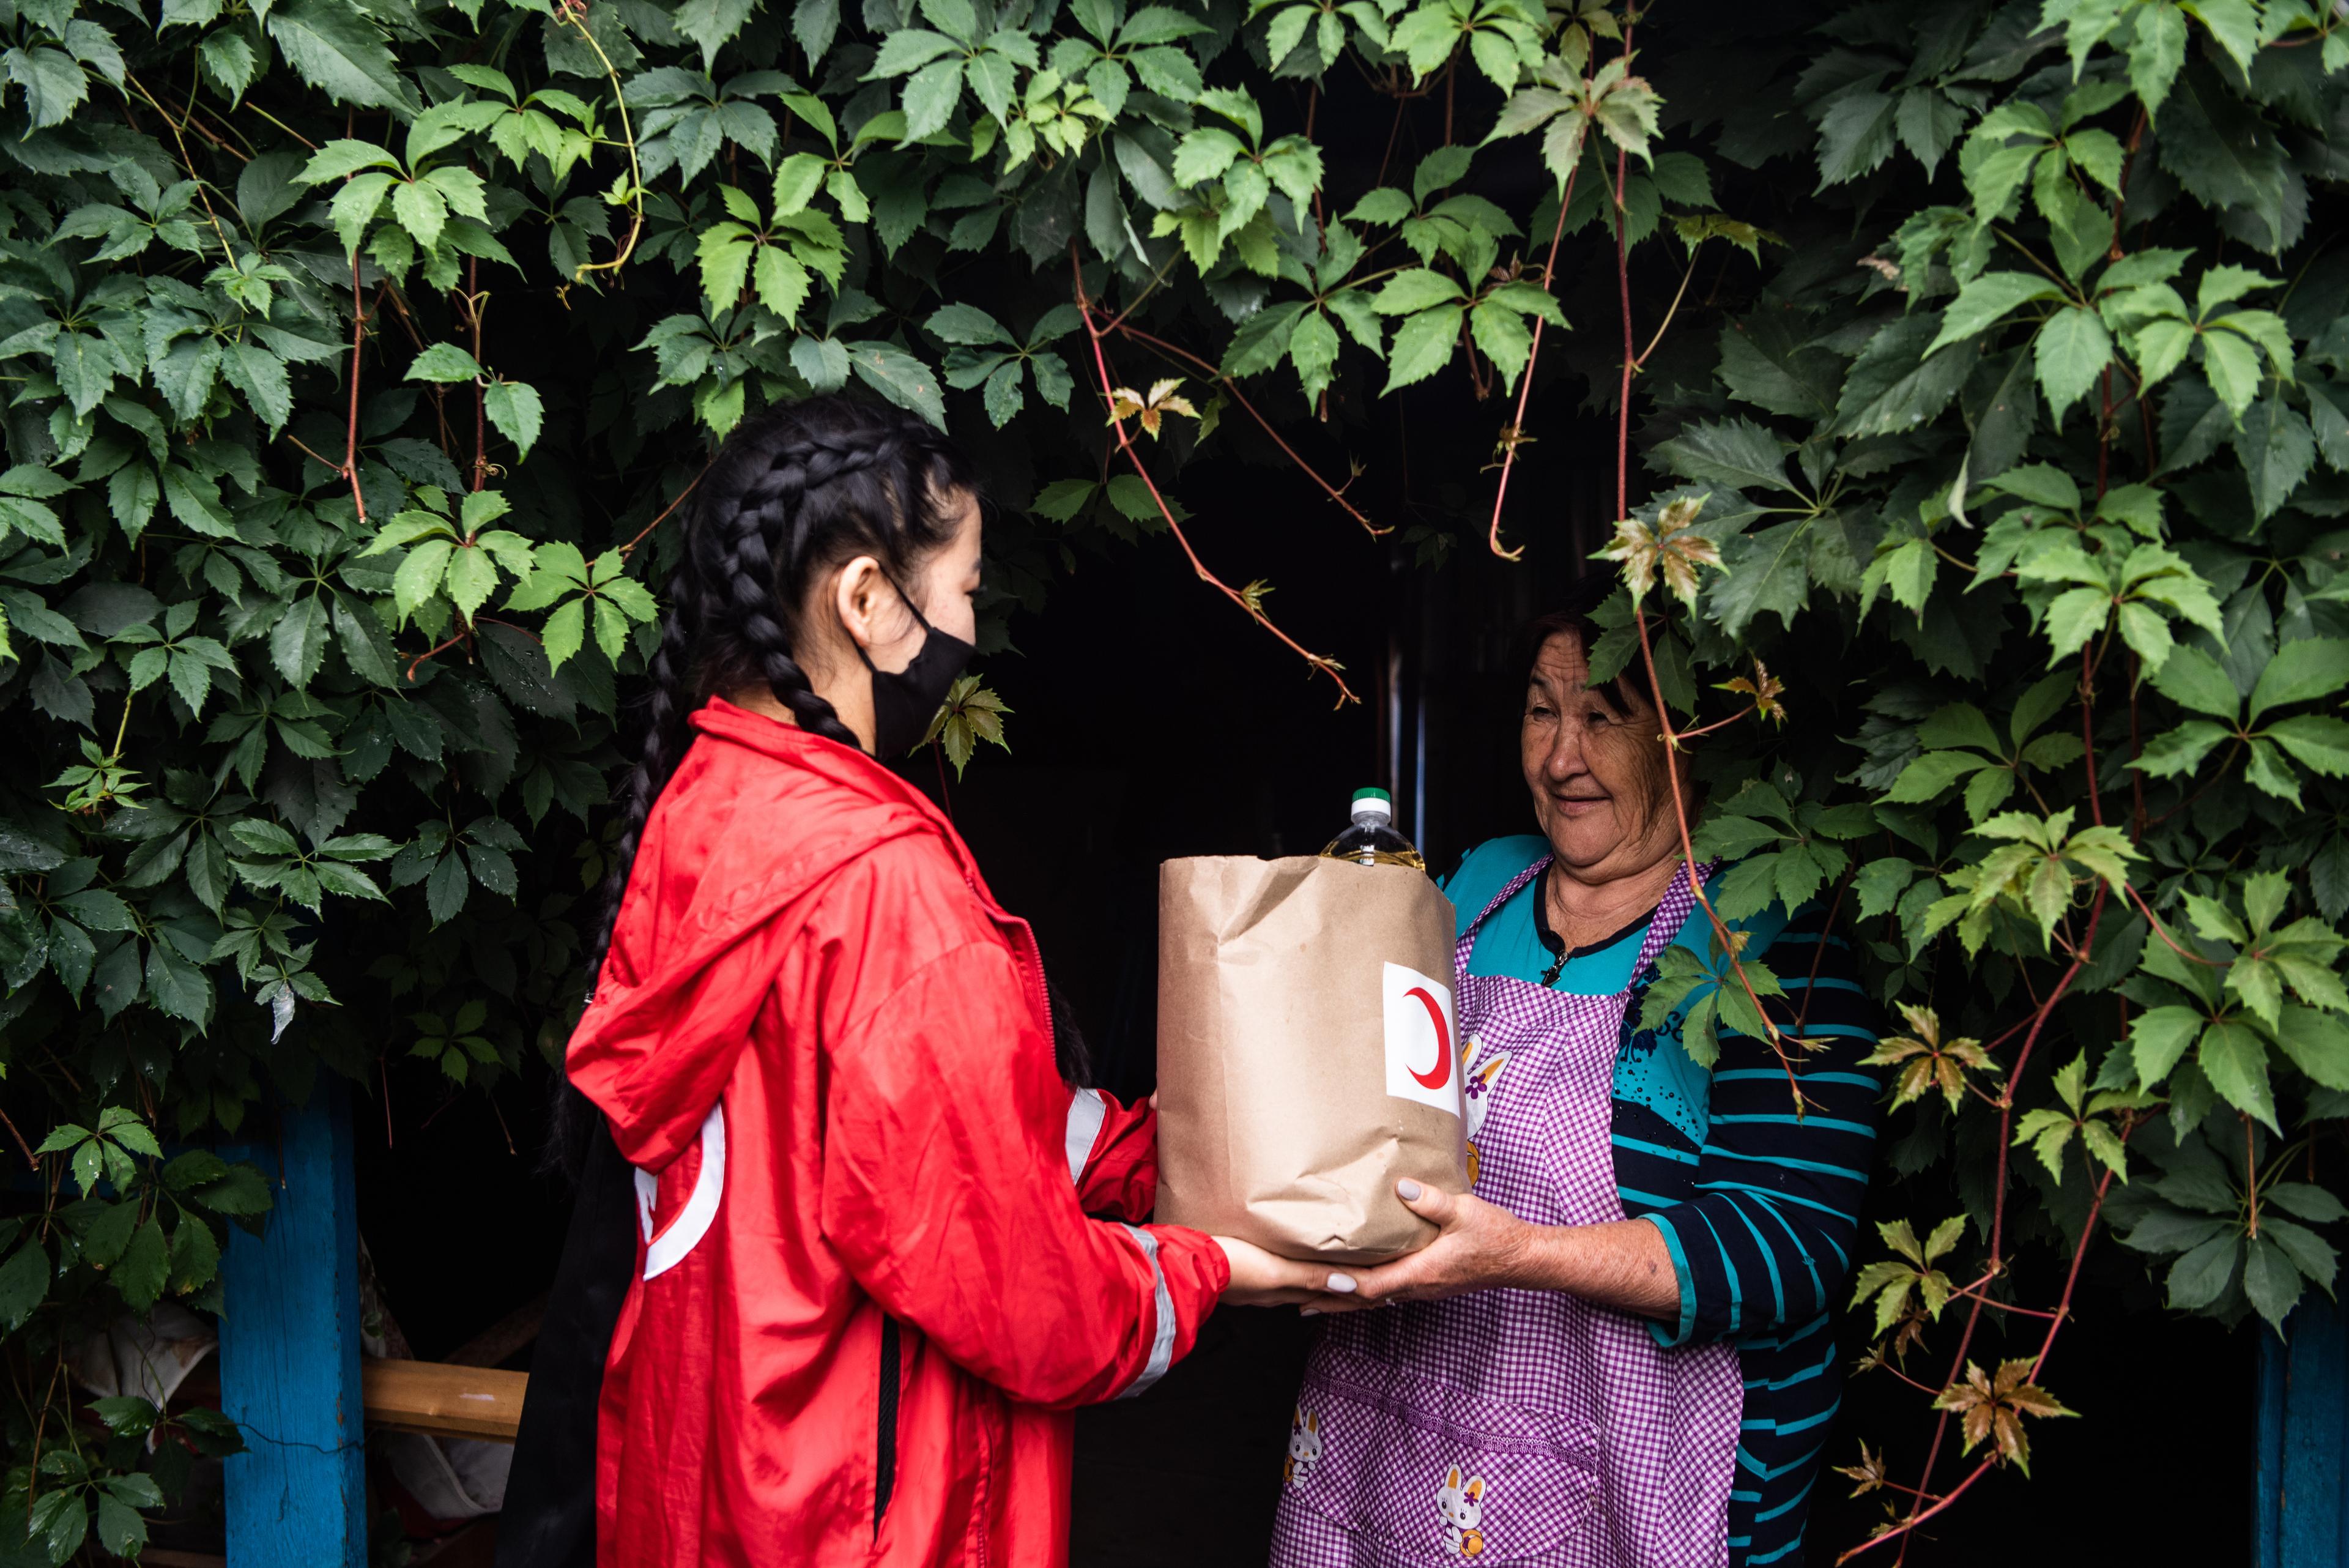 A volunteer of the Kyrgyz Red Crescent, hands a food package to beneficiary Nurmukhanbetova Karlygash. She is standing in front of a house heavily covered with plants.